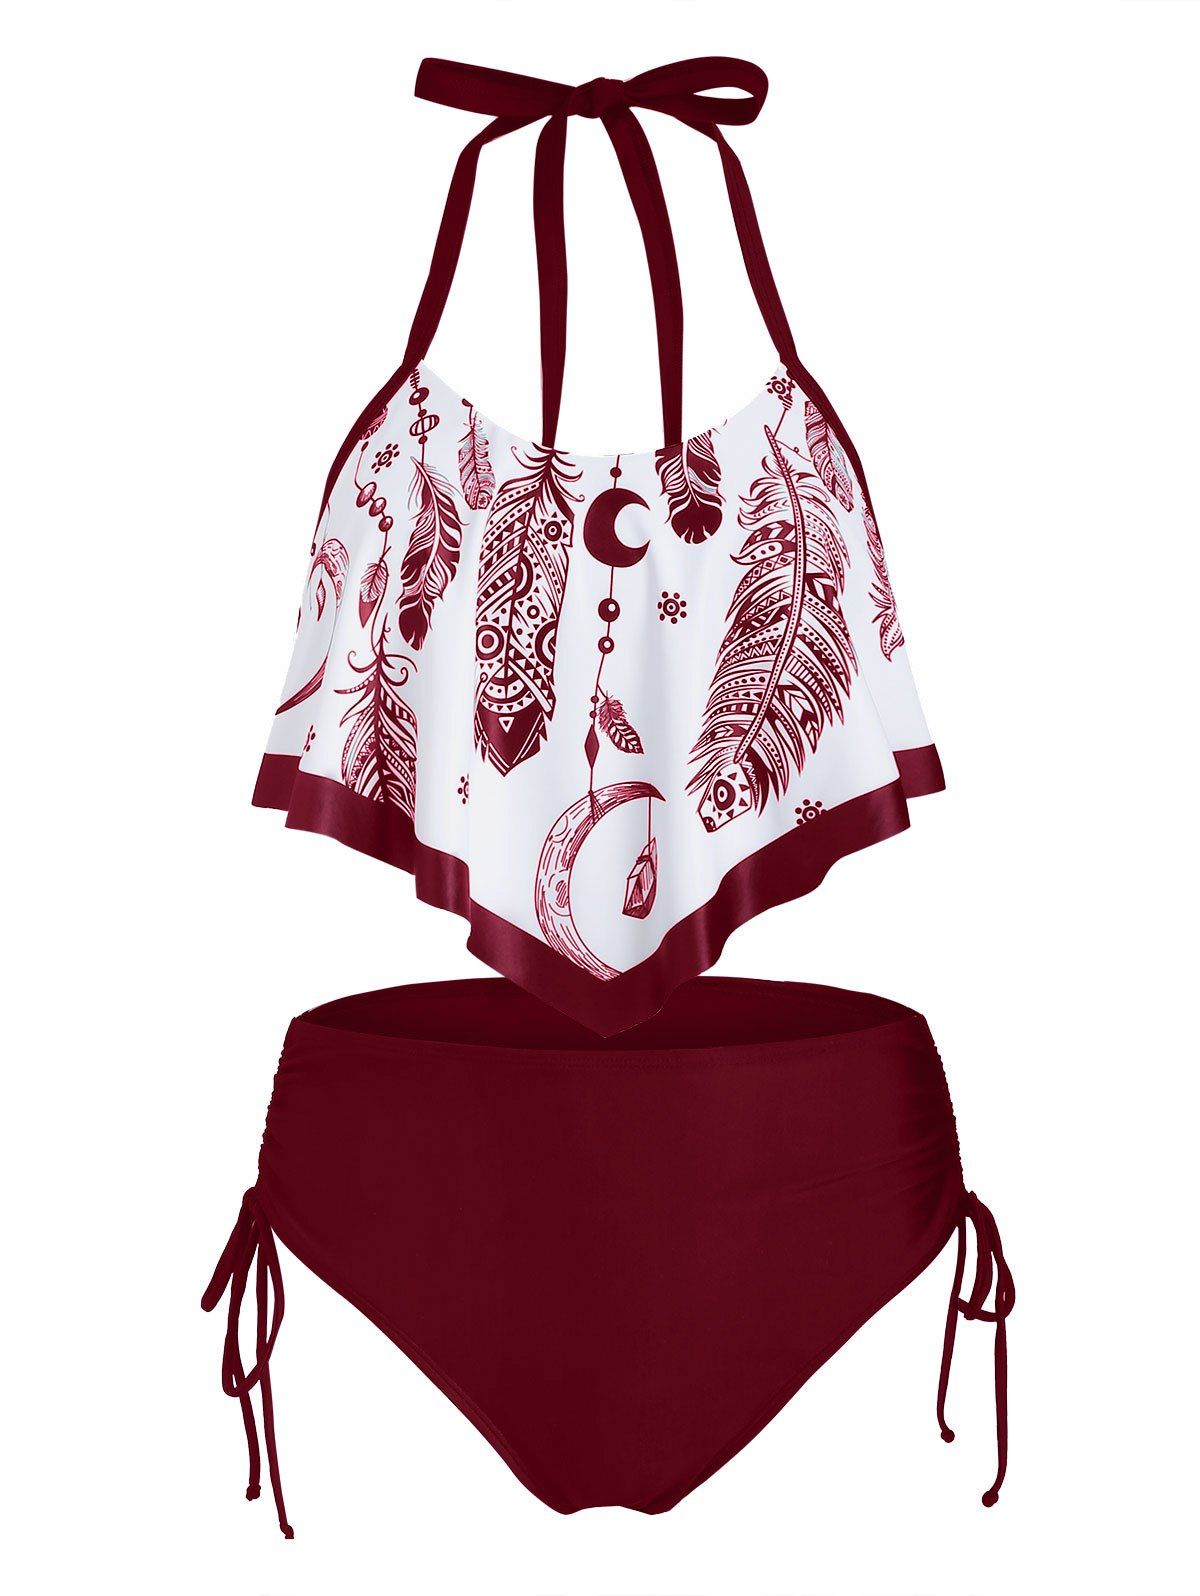 Bohemian Tankini Swimsuit Feather Print Bathing Suit Flounce Overlay Cinched Halter Two Piece Swimwear - RED WINE XL